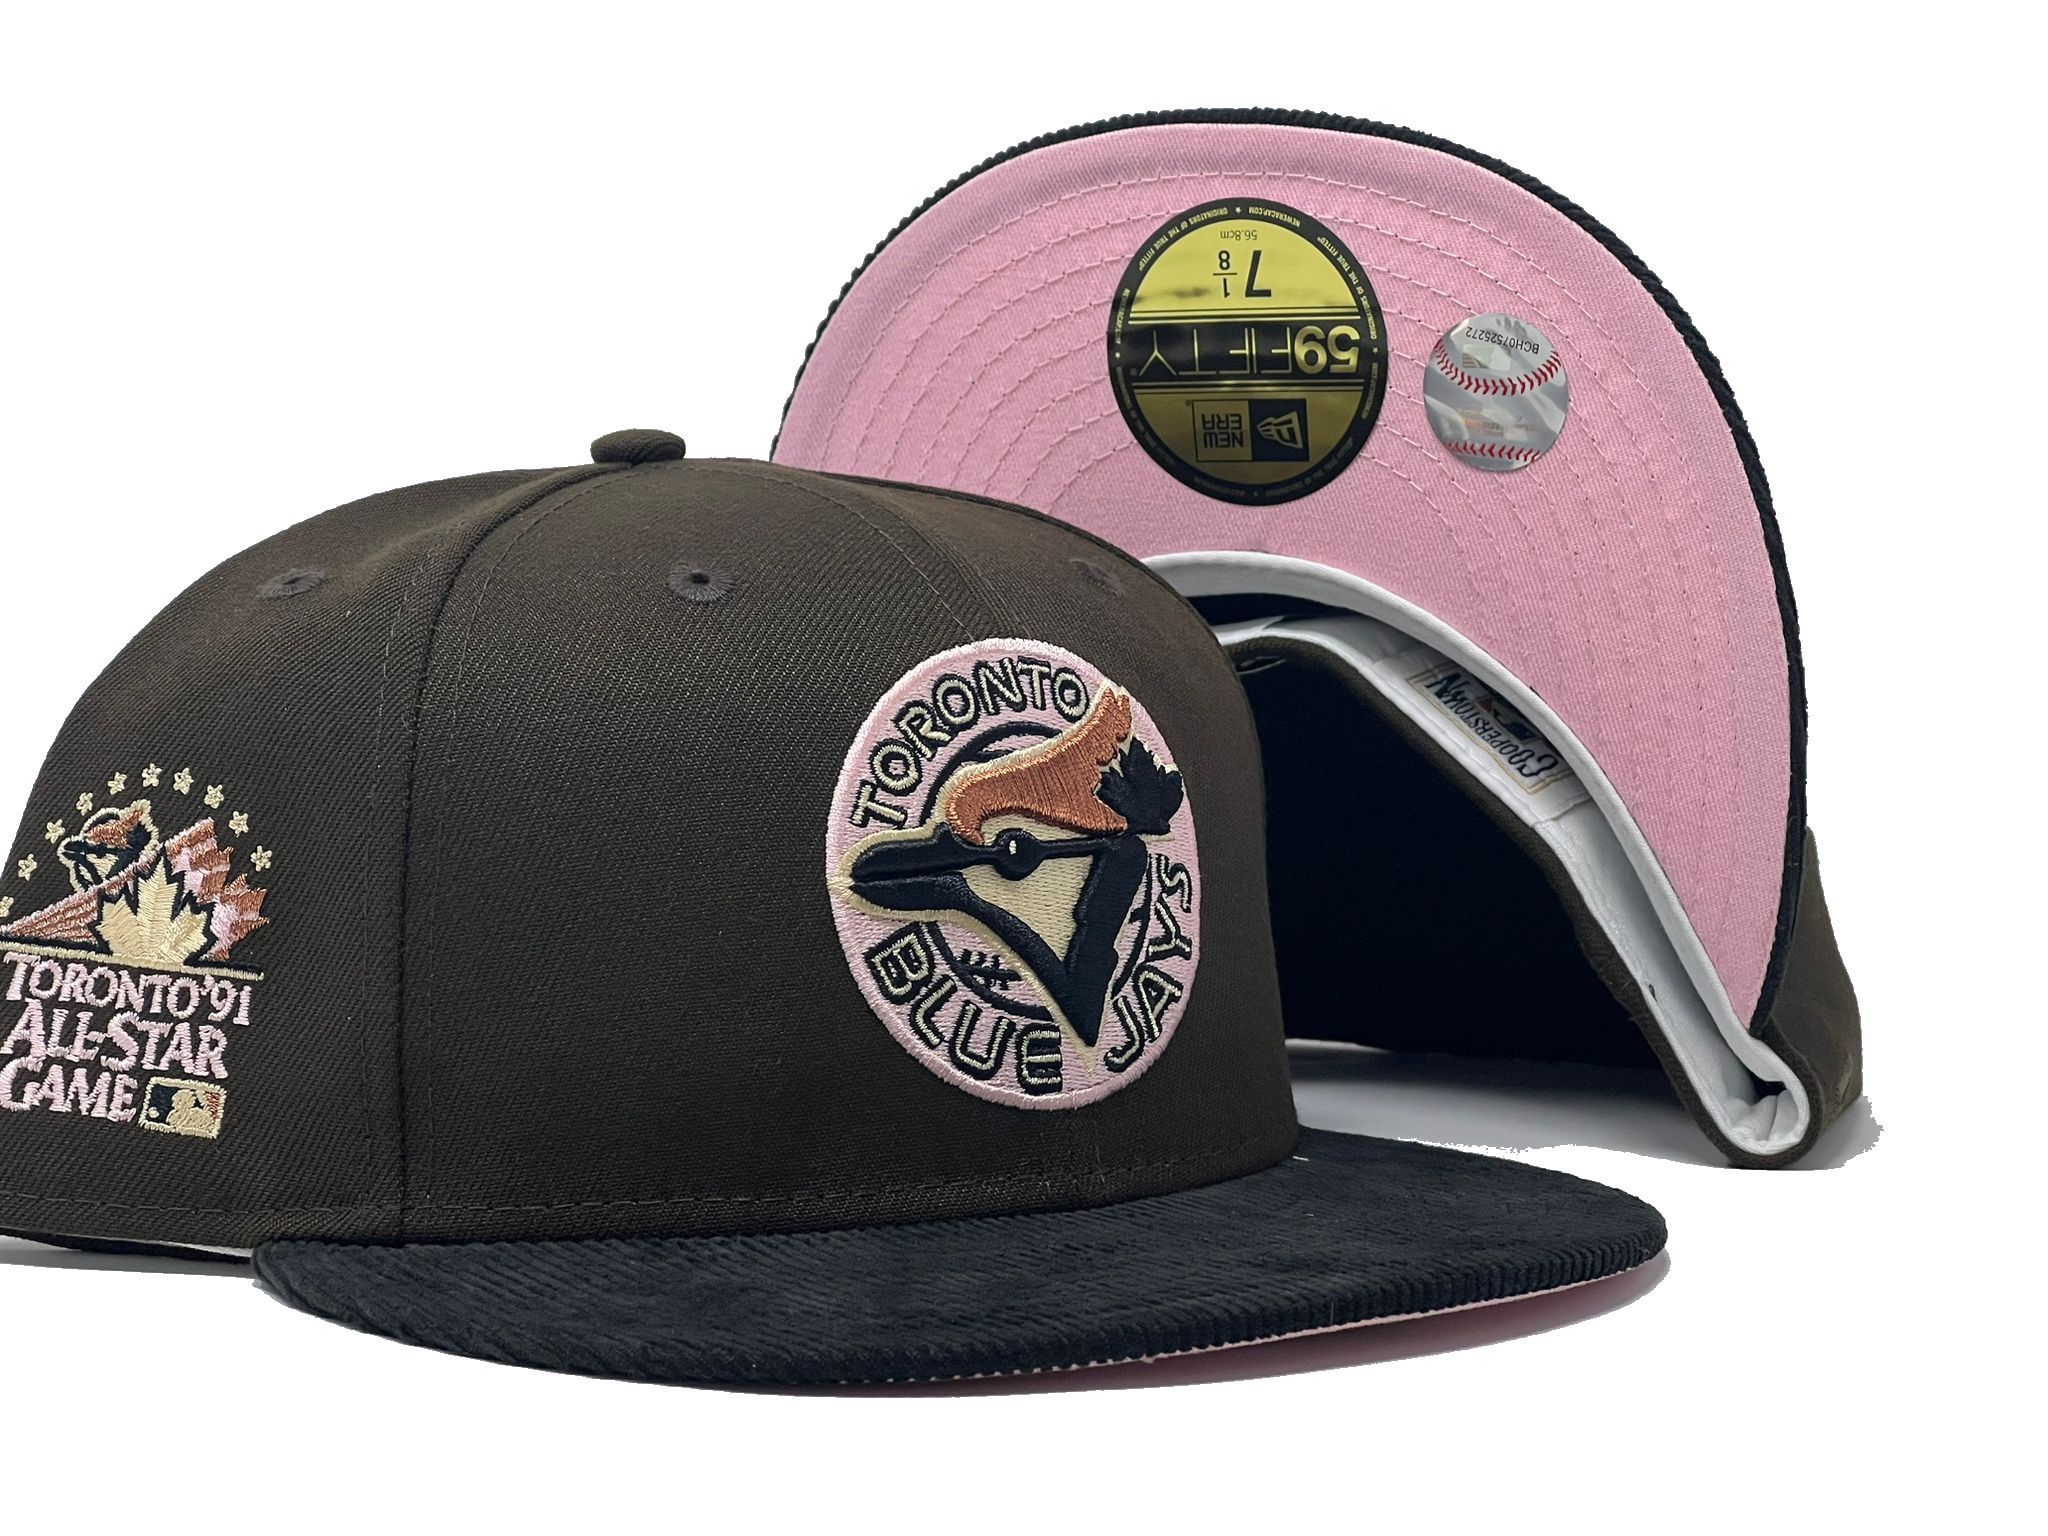 New Era Brown/Pink 91' All Star Game Toronto Blue Jays Fitted Cap 7 1/8 for  Sale in El Mirage, AZ - OfferUp